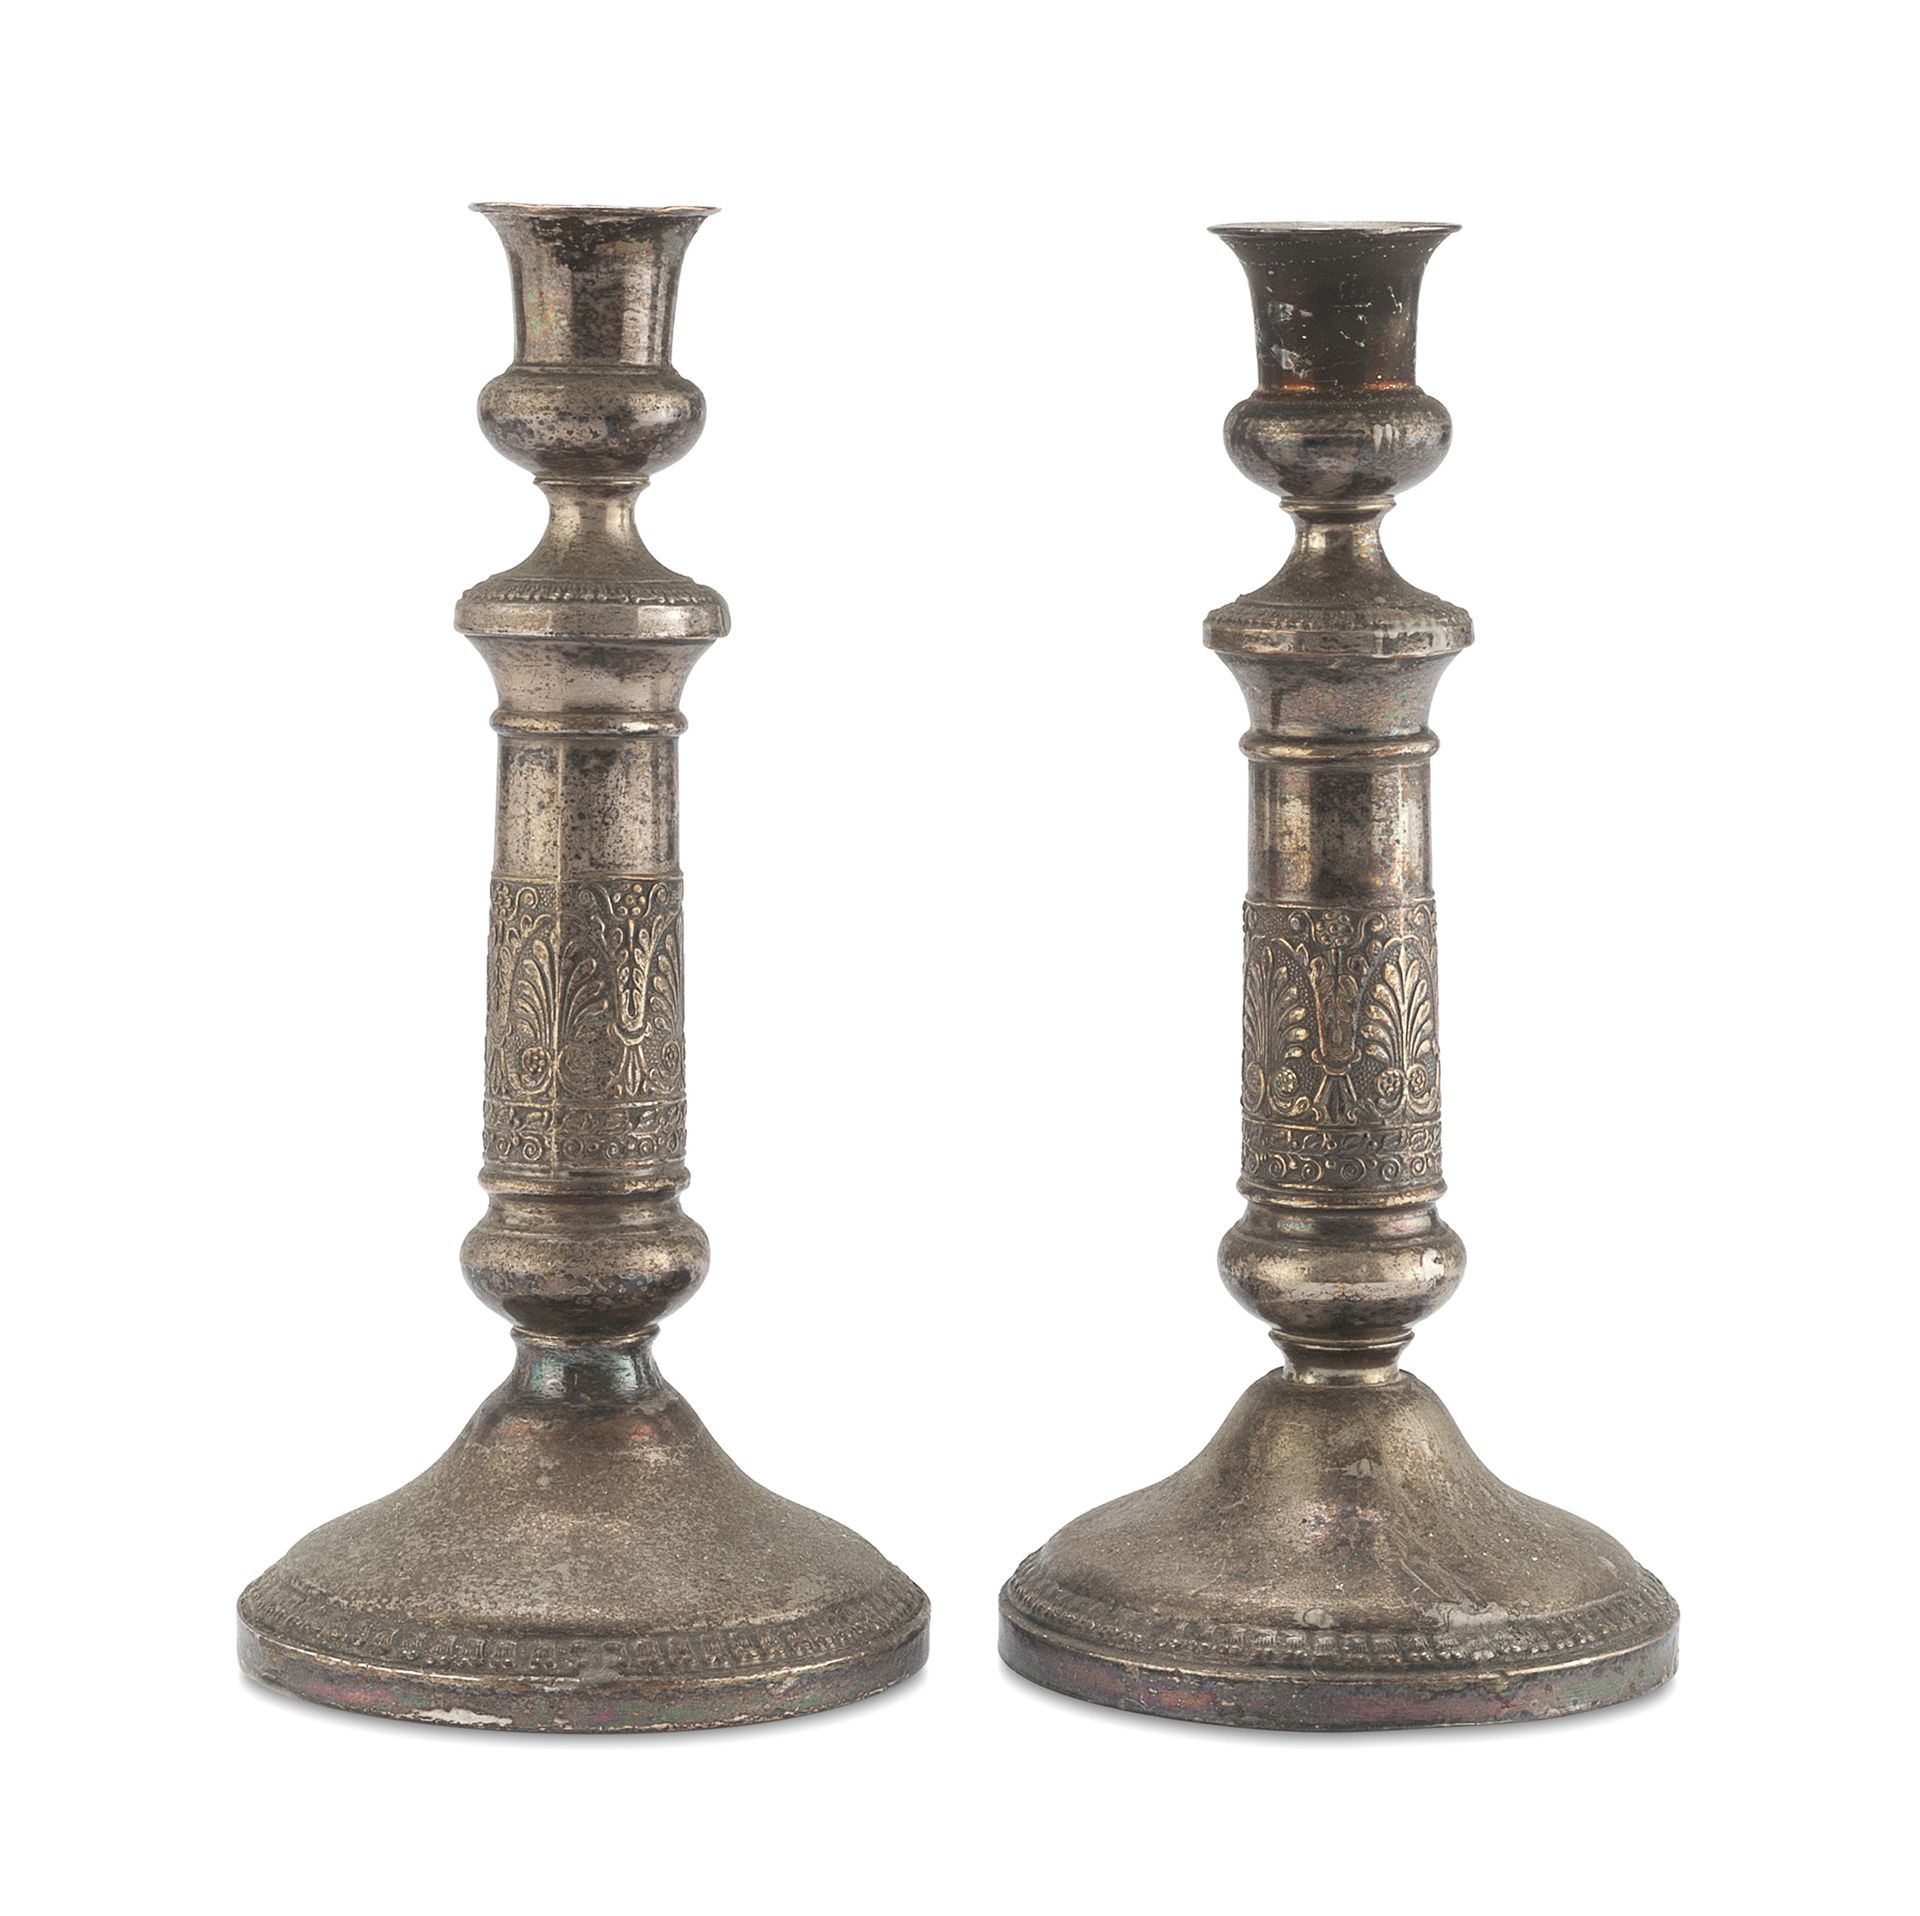 Null PAIR OF SILVER-PLATED CANDLESTICKS